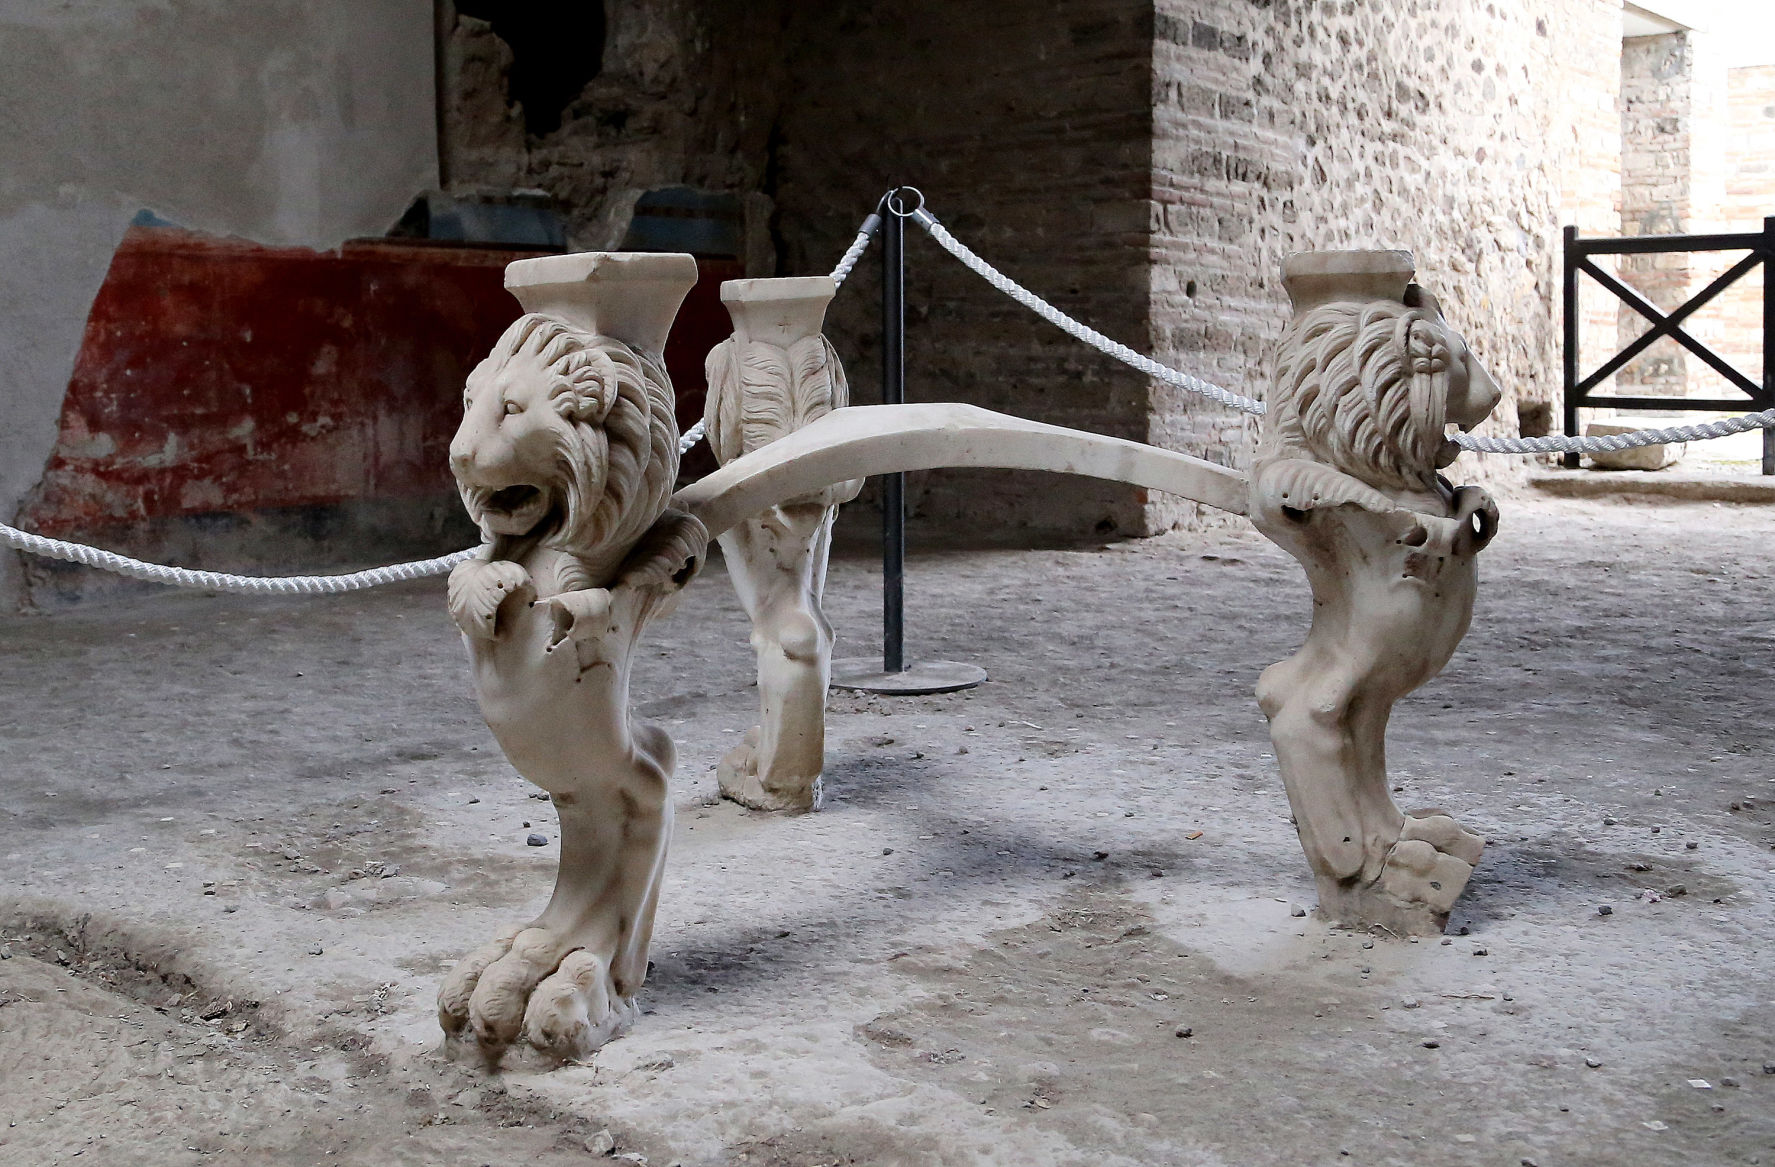 Pompeii: Dead city lives in ruins